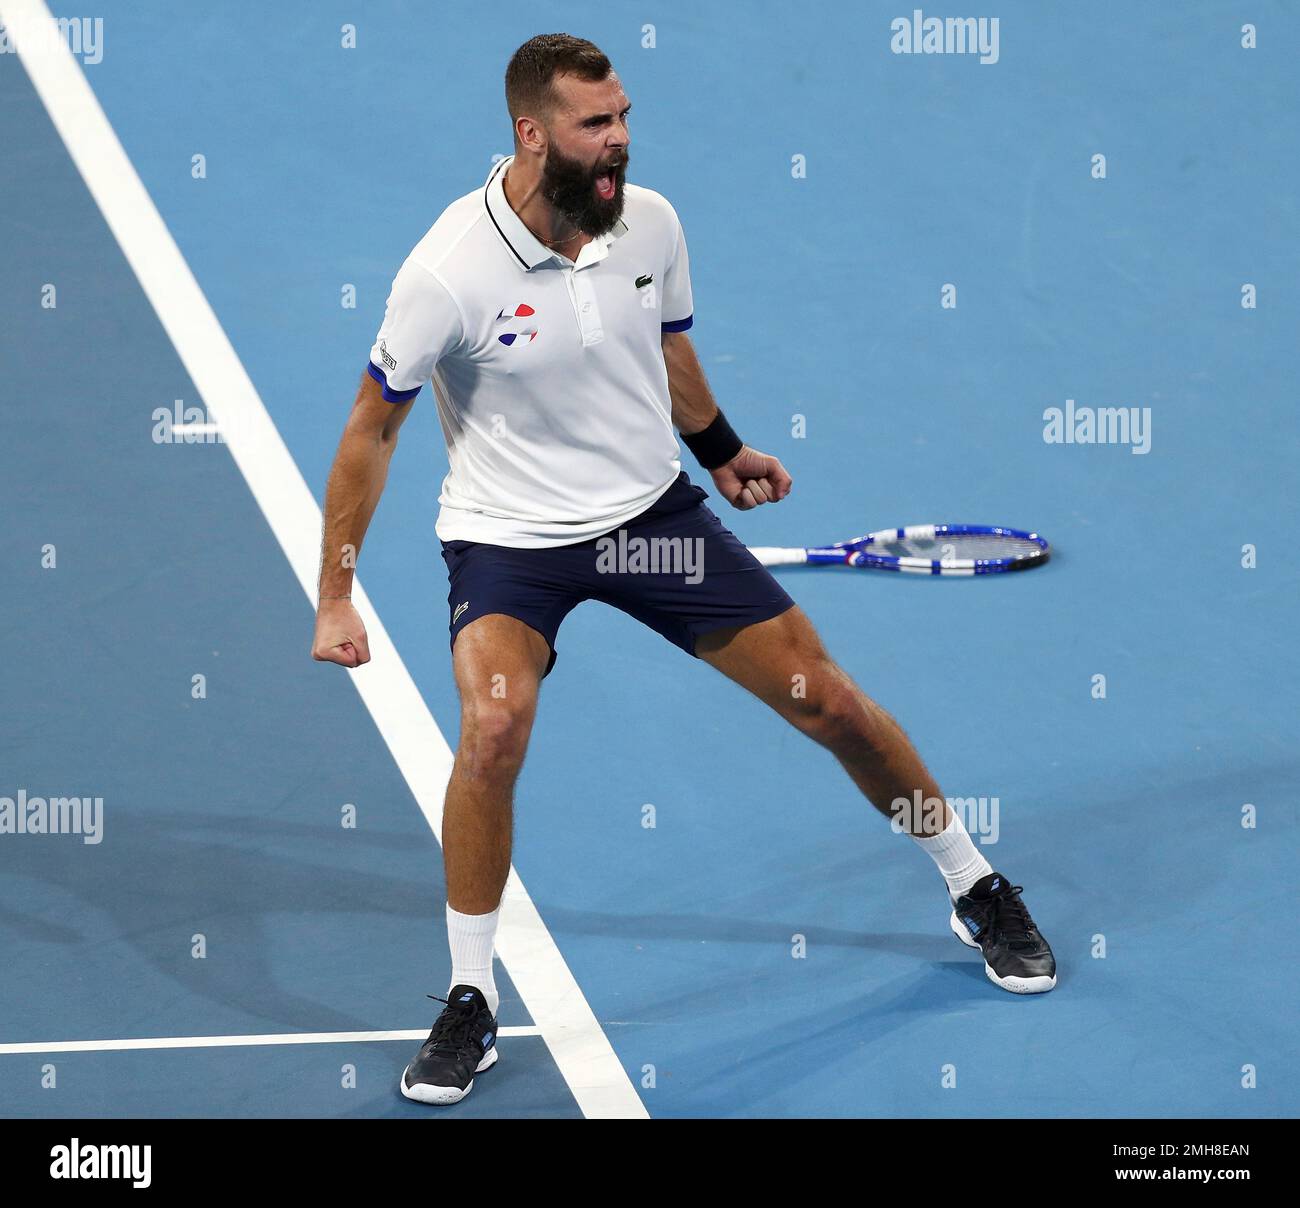 Benoit Paire of France reacts after winning his match against Dusan Lajovic of Serbia 6-2,